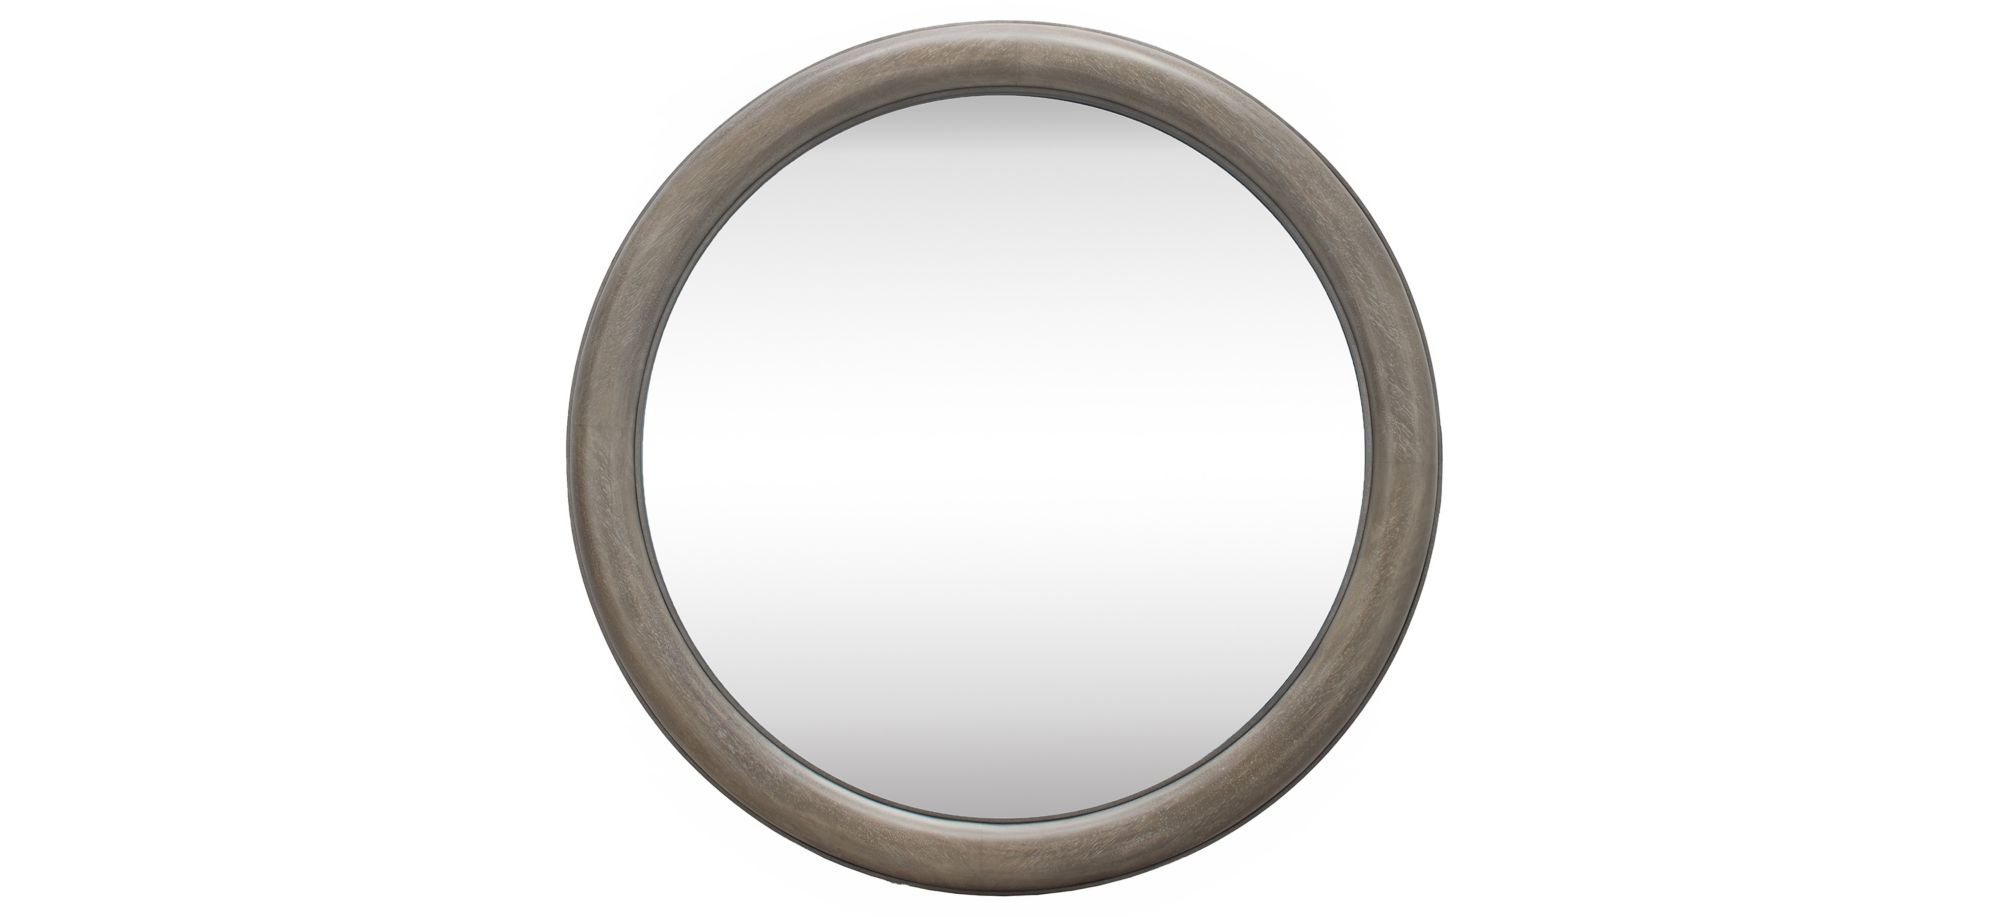 Castleton Mirror in Smoked Oyster by Bellanest.